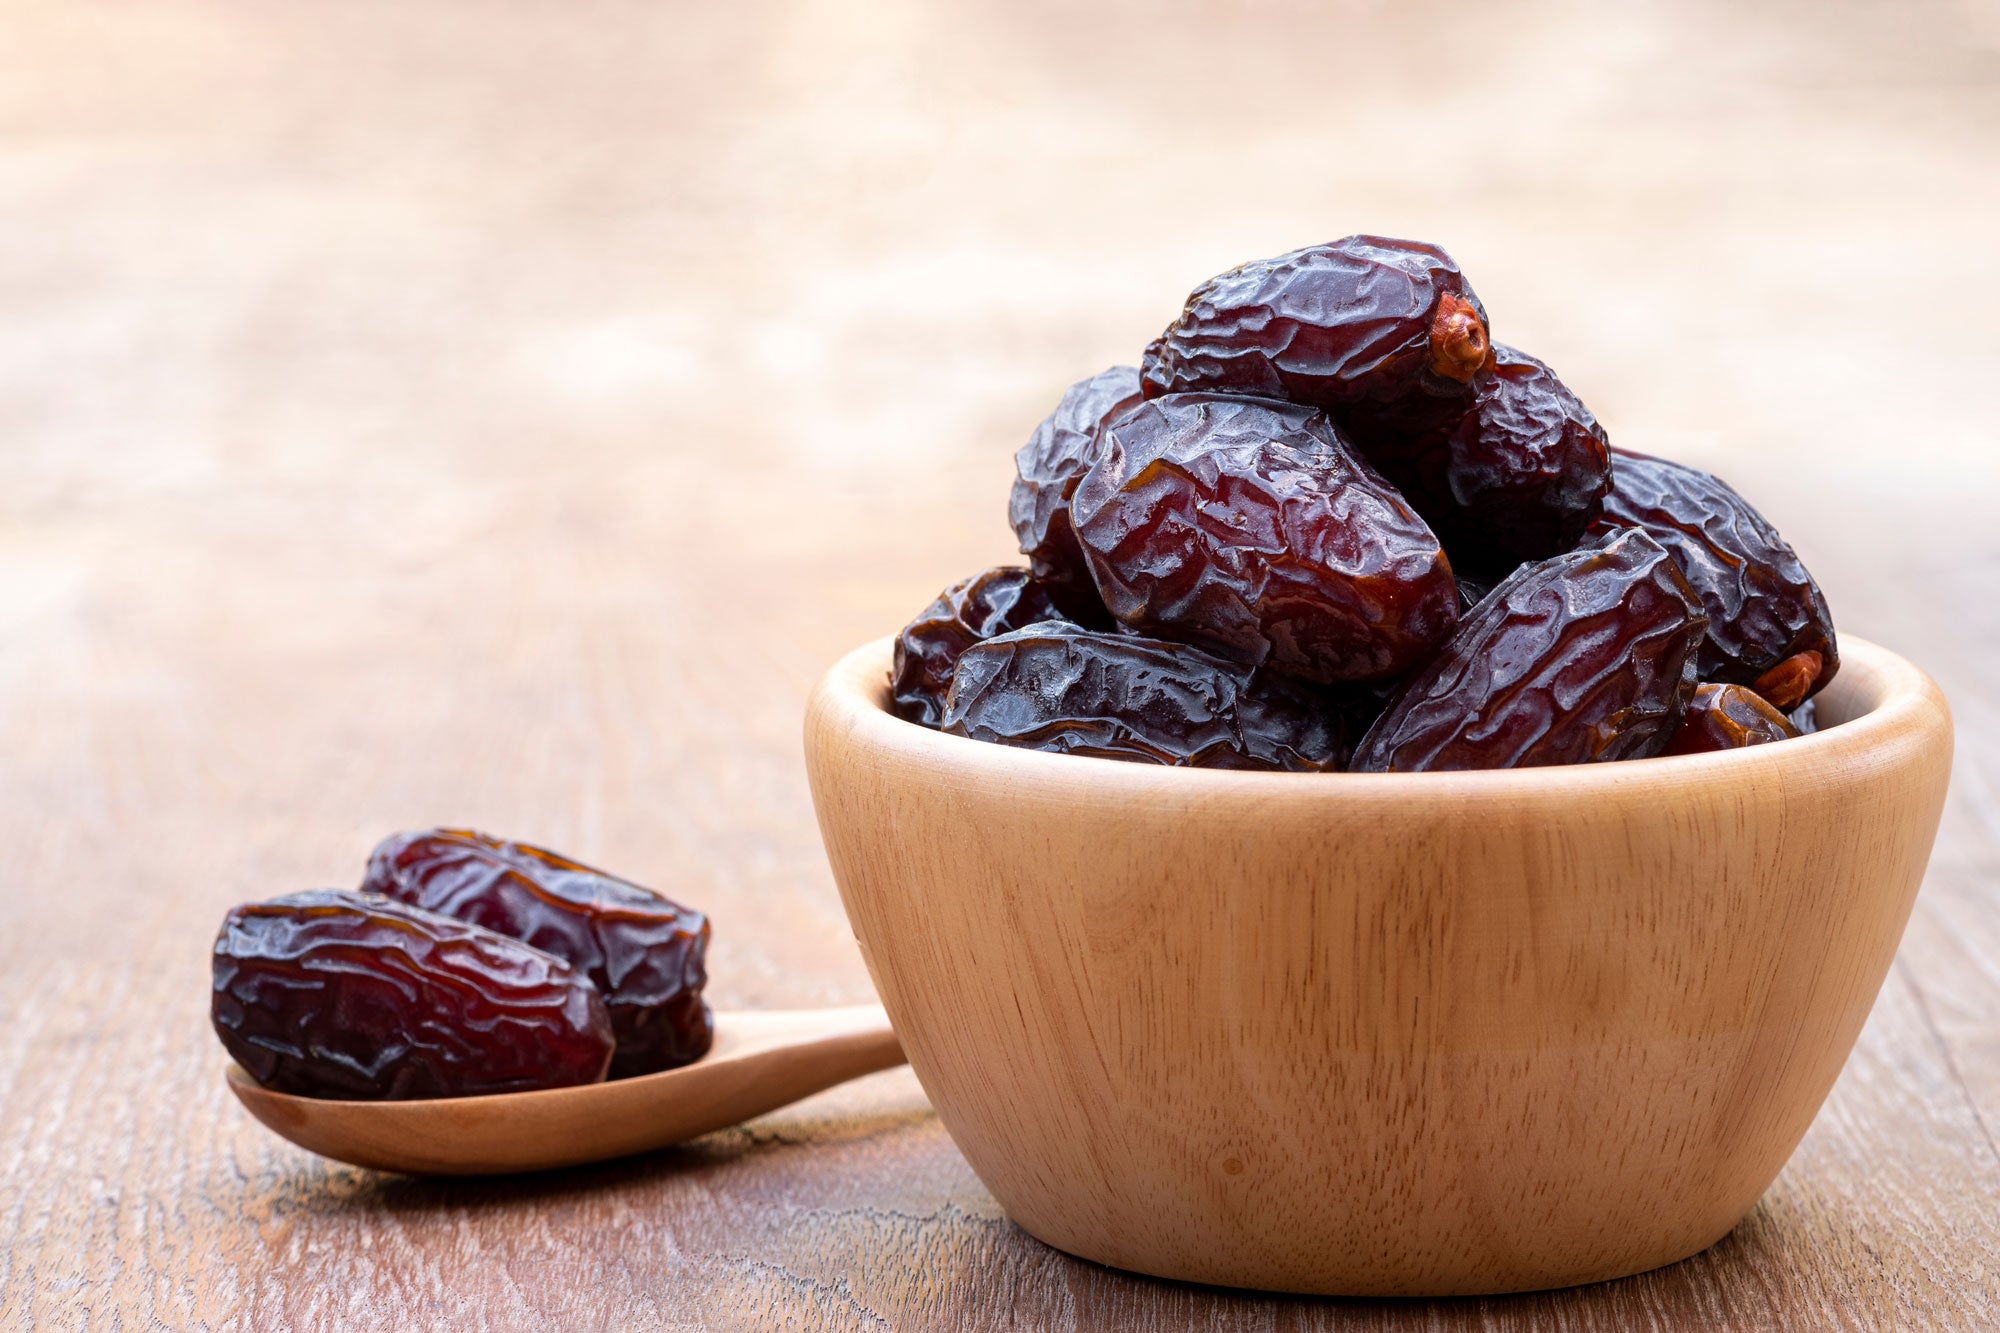 Plump Medjool dates in wooden bowl and spoon.